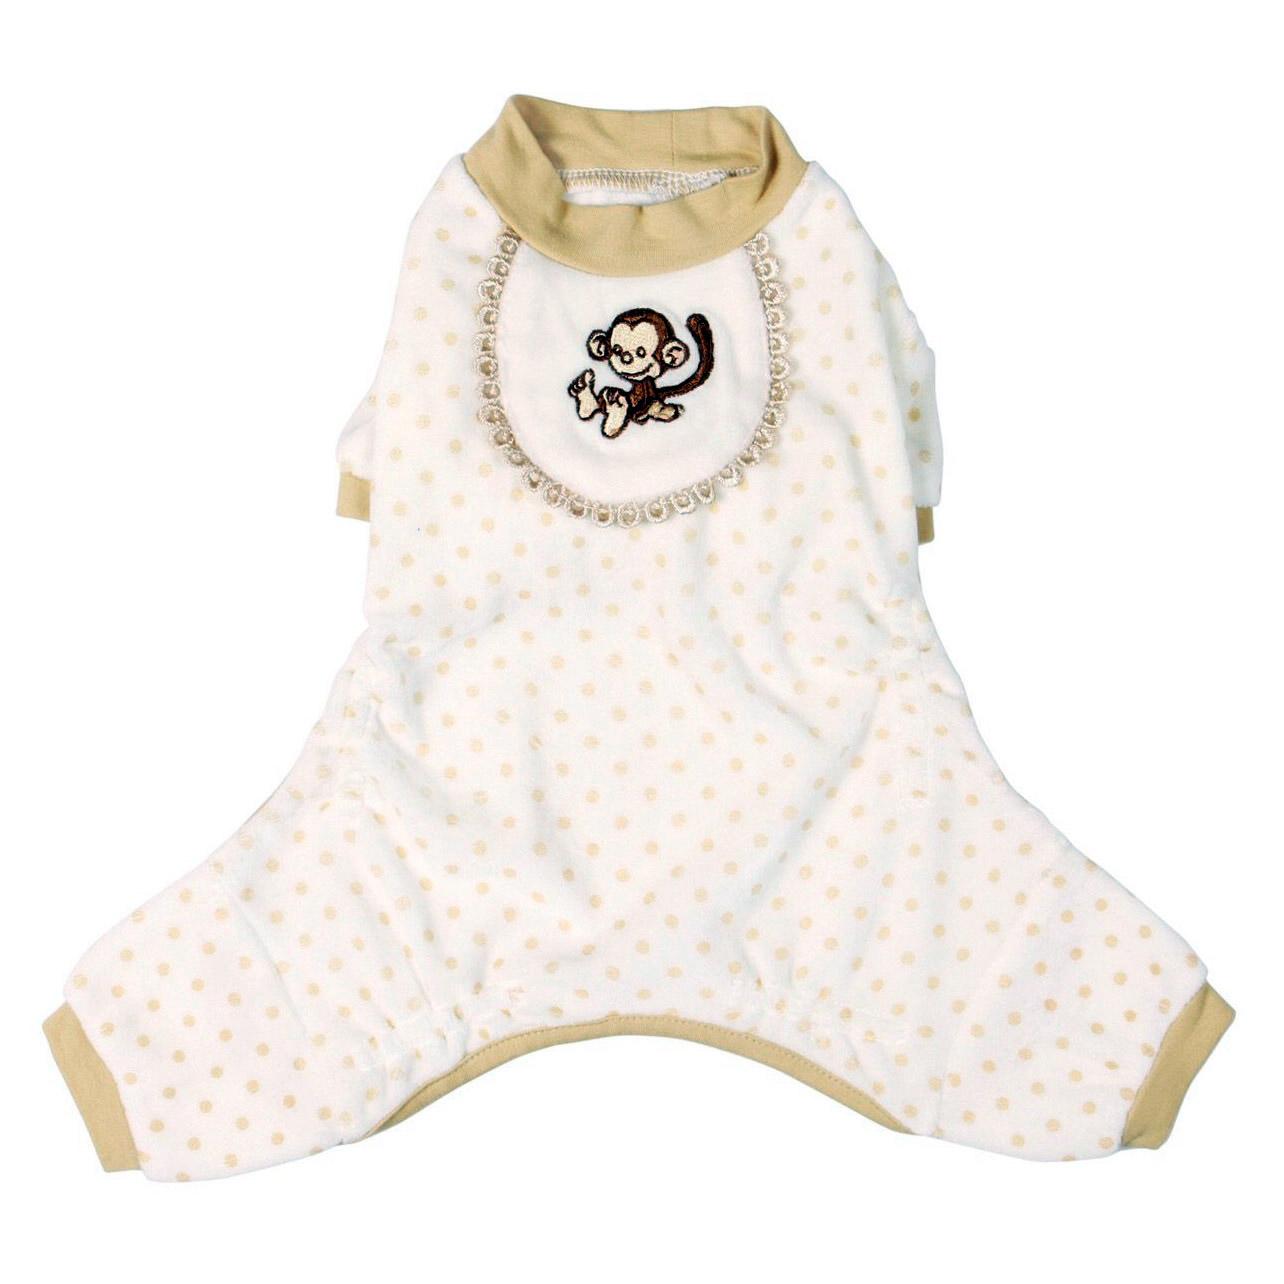 Pooch Outfitters Monkey Design Dog Pajamas - Beige